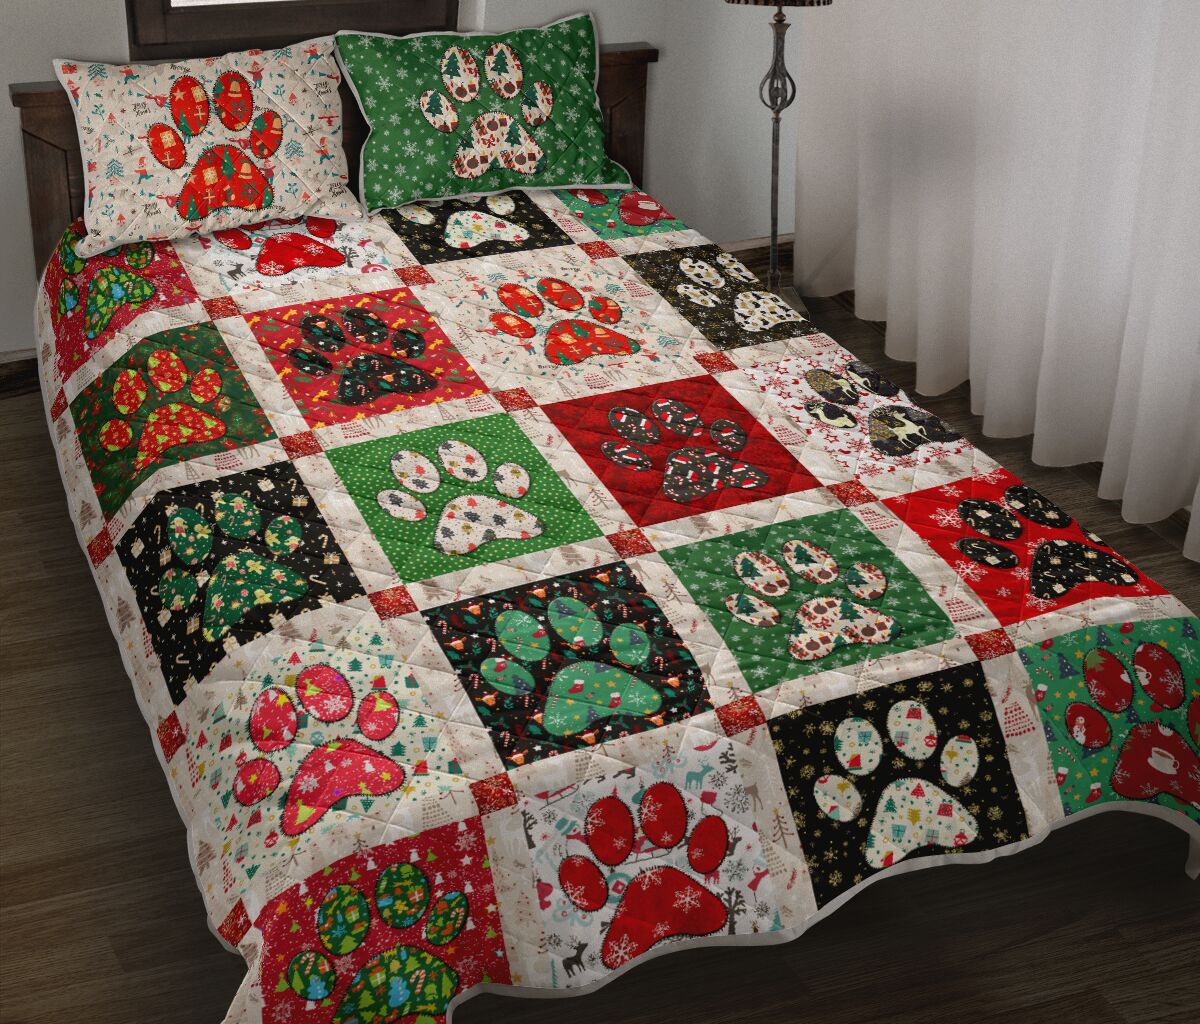 Dog Christmas Seamless Qbs Quilt Bed Set Bedroom Decoration Twin/Queen/King Size Bedding